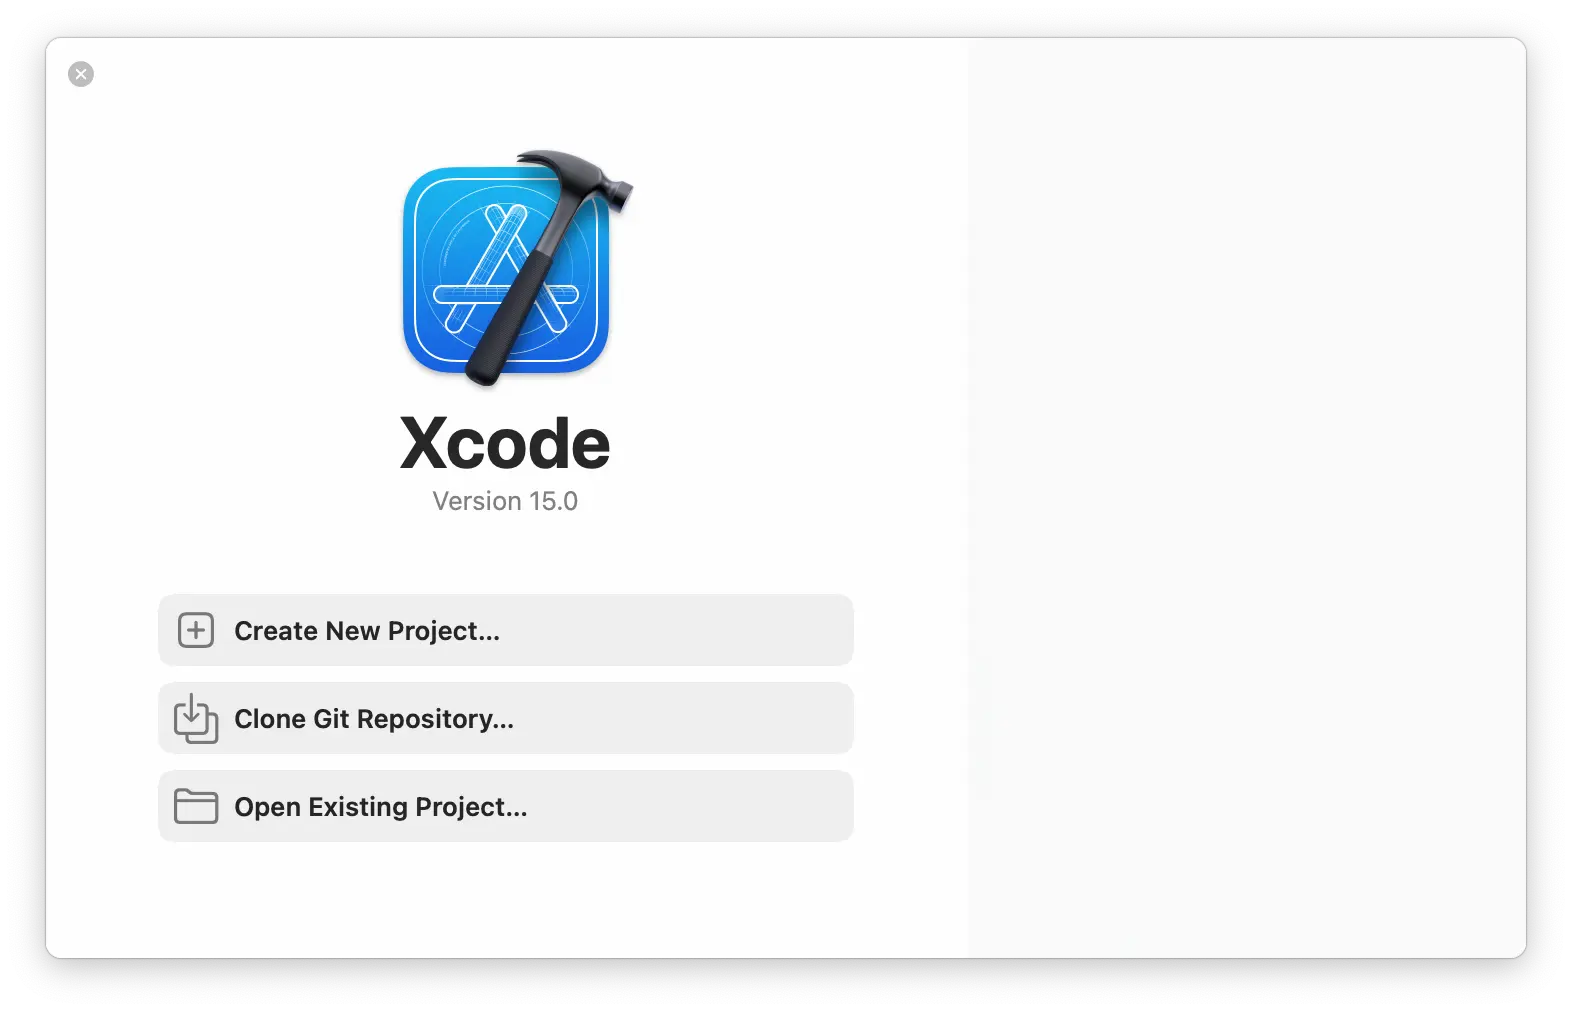 Shows the Xcode starter video to start project